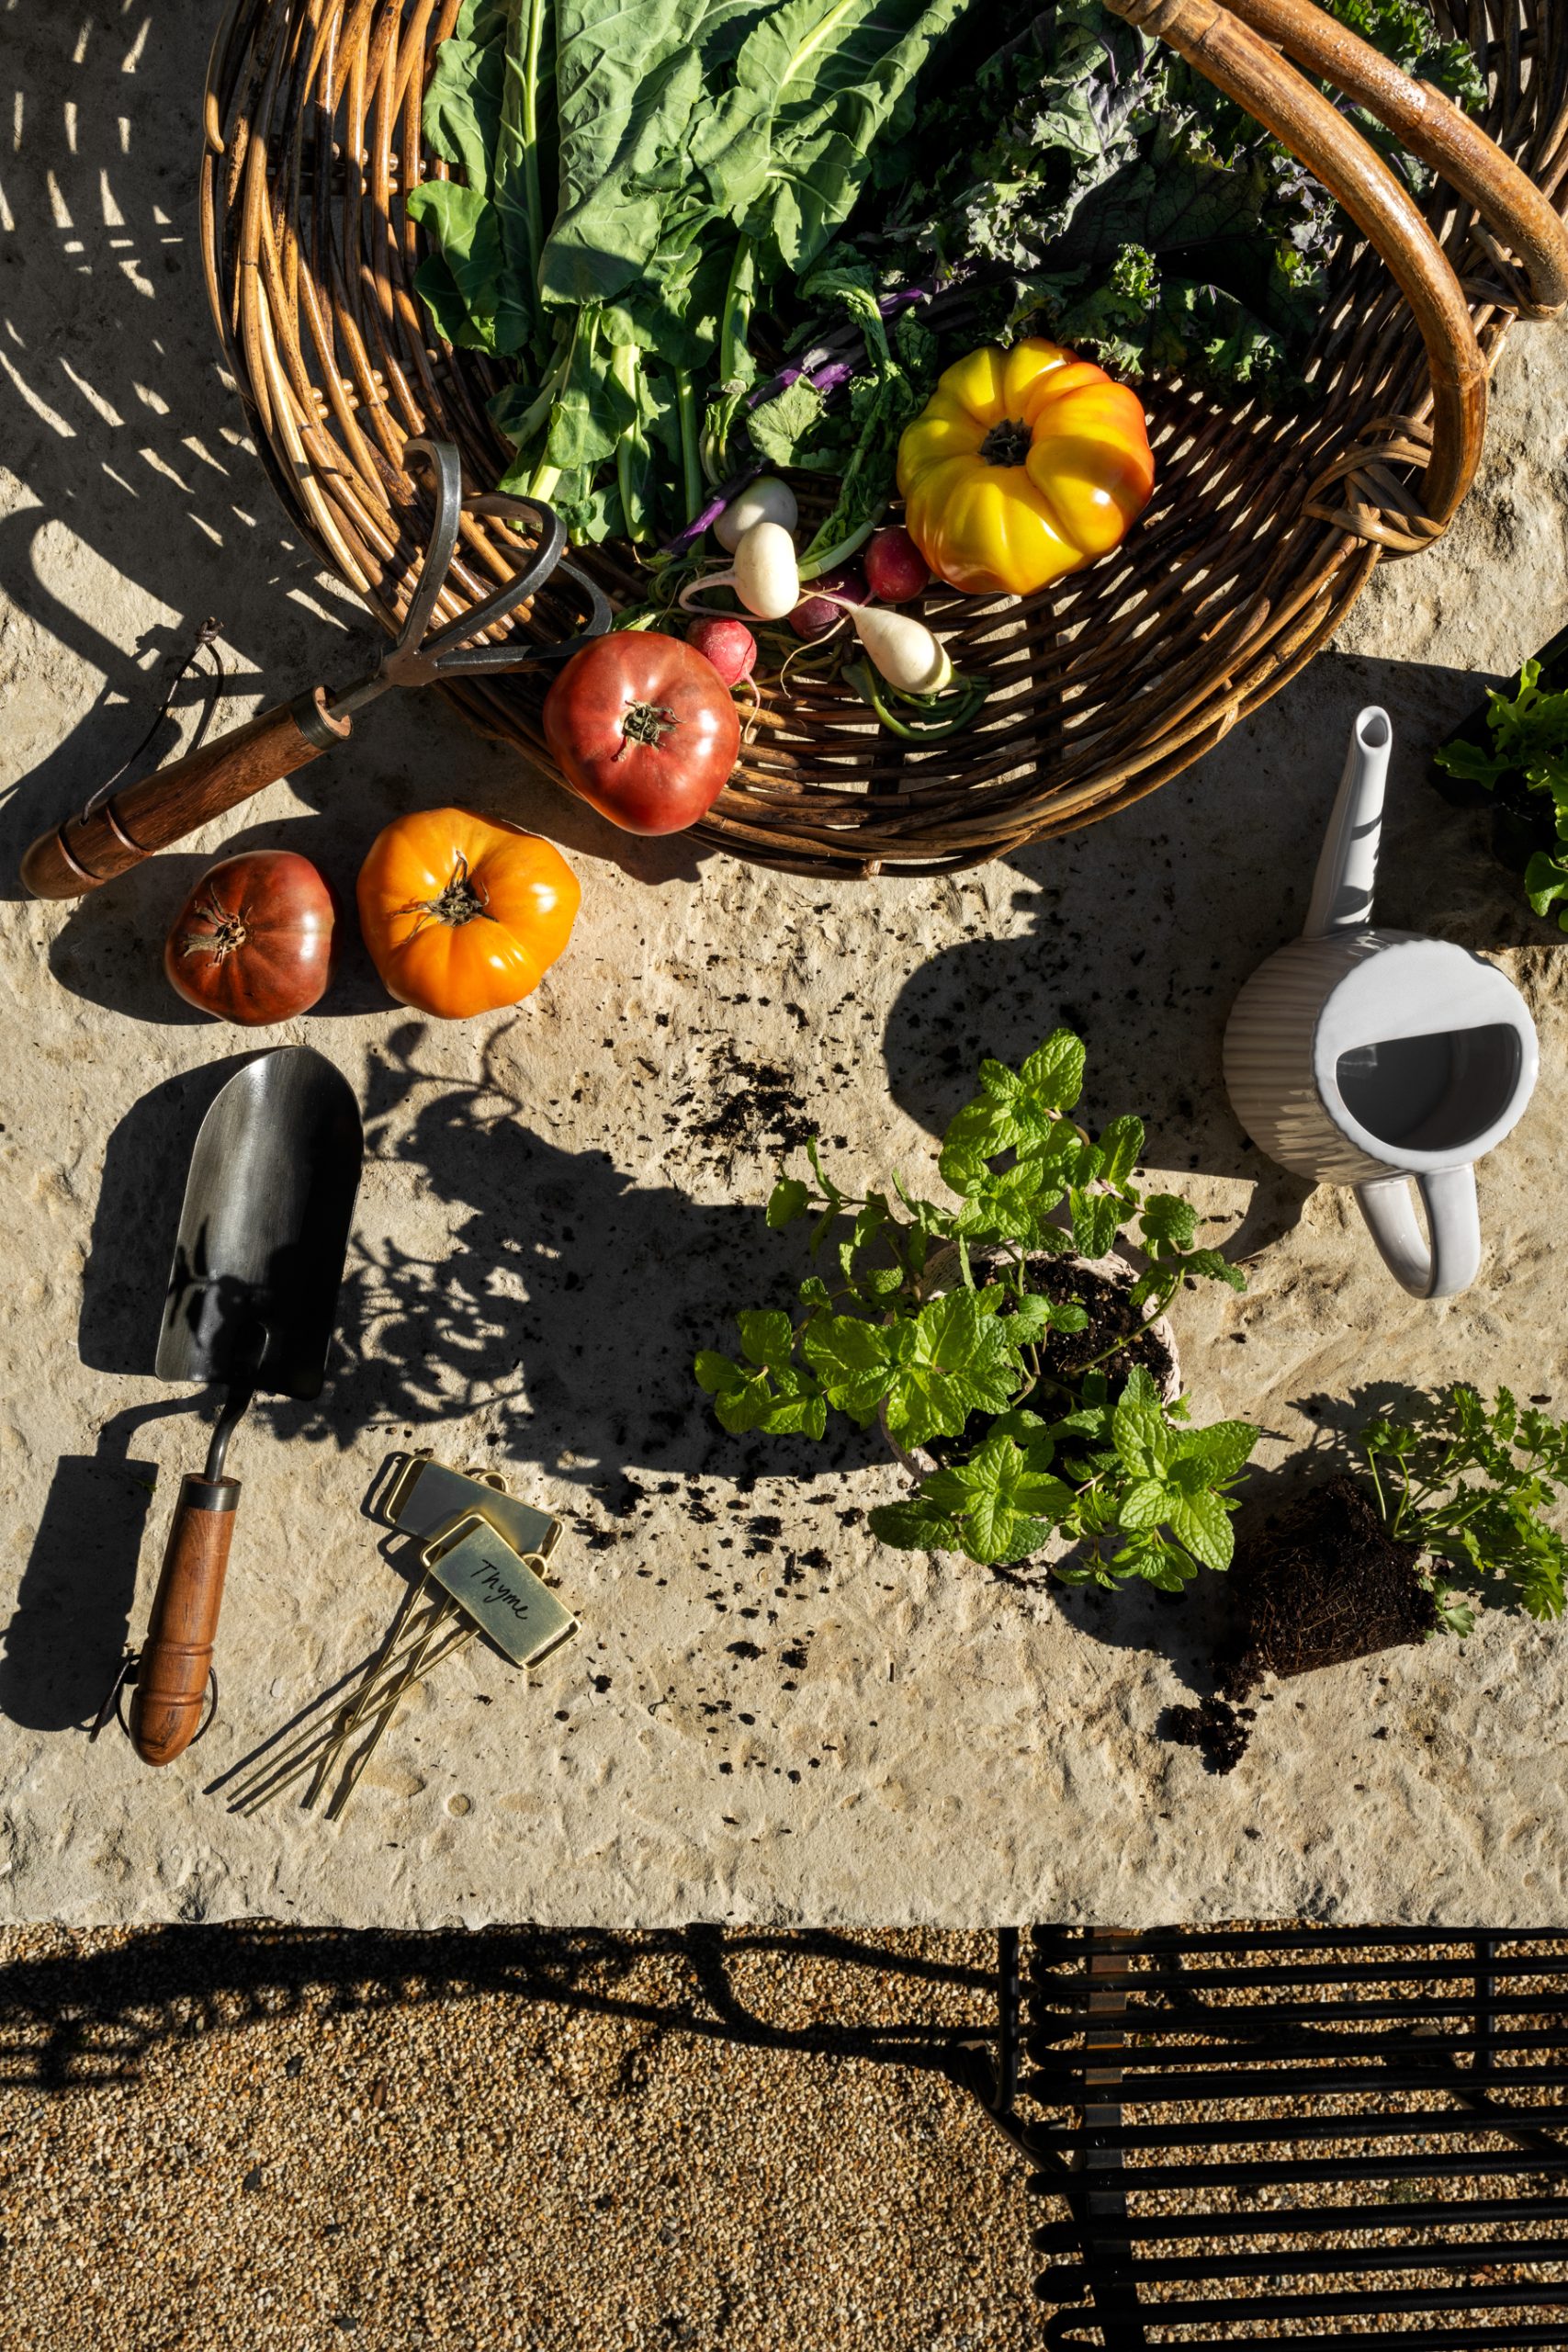 rattan basket with vegetables and gardening shovel and watering can